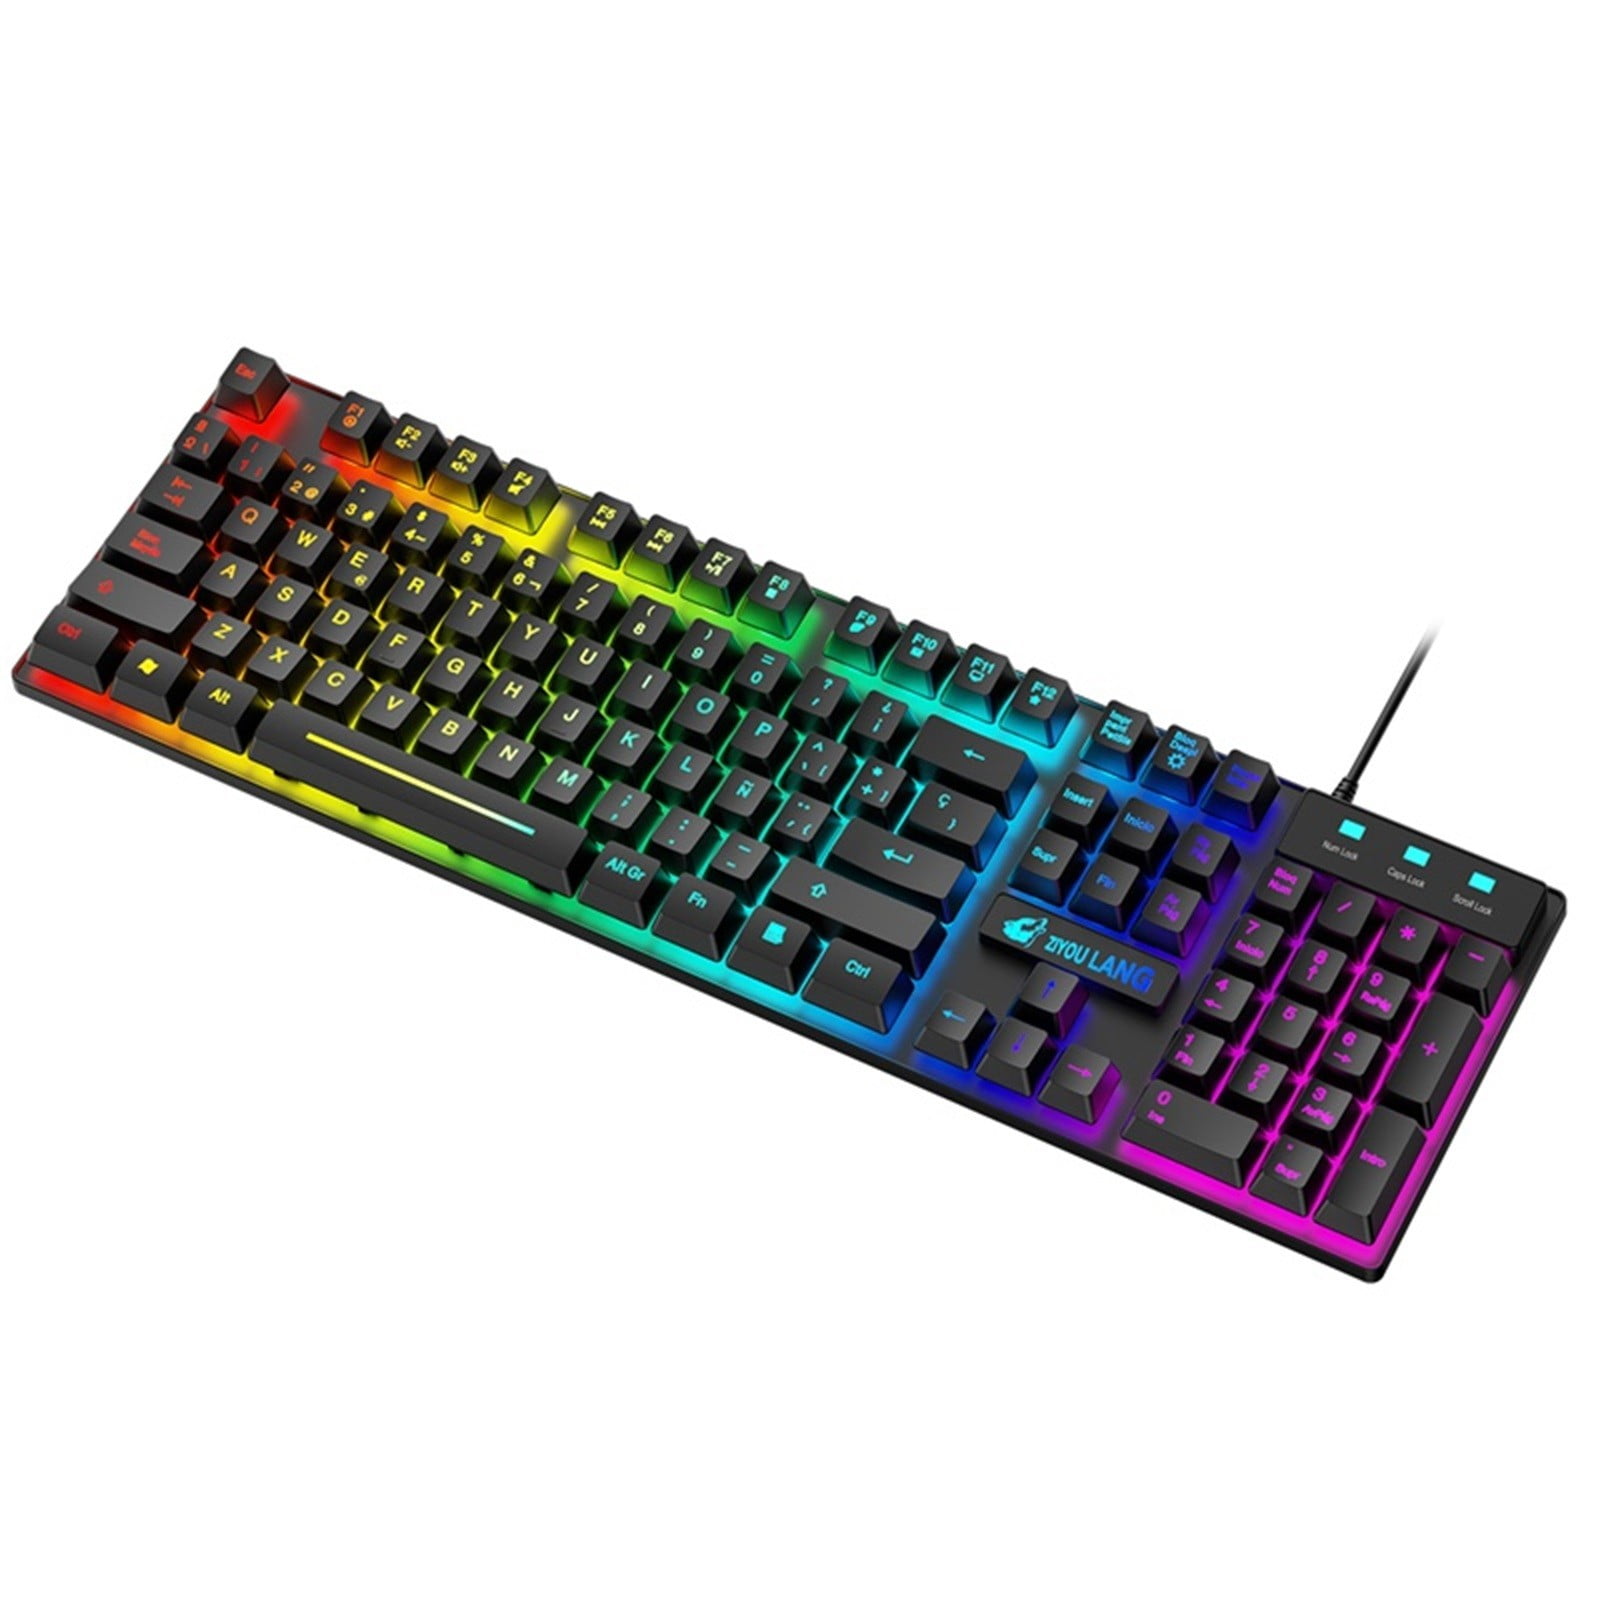 Spanish 104-key Keyboard T13 Gaming Bowake With Backlit Mouse QWERTY Keyboard And RGB